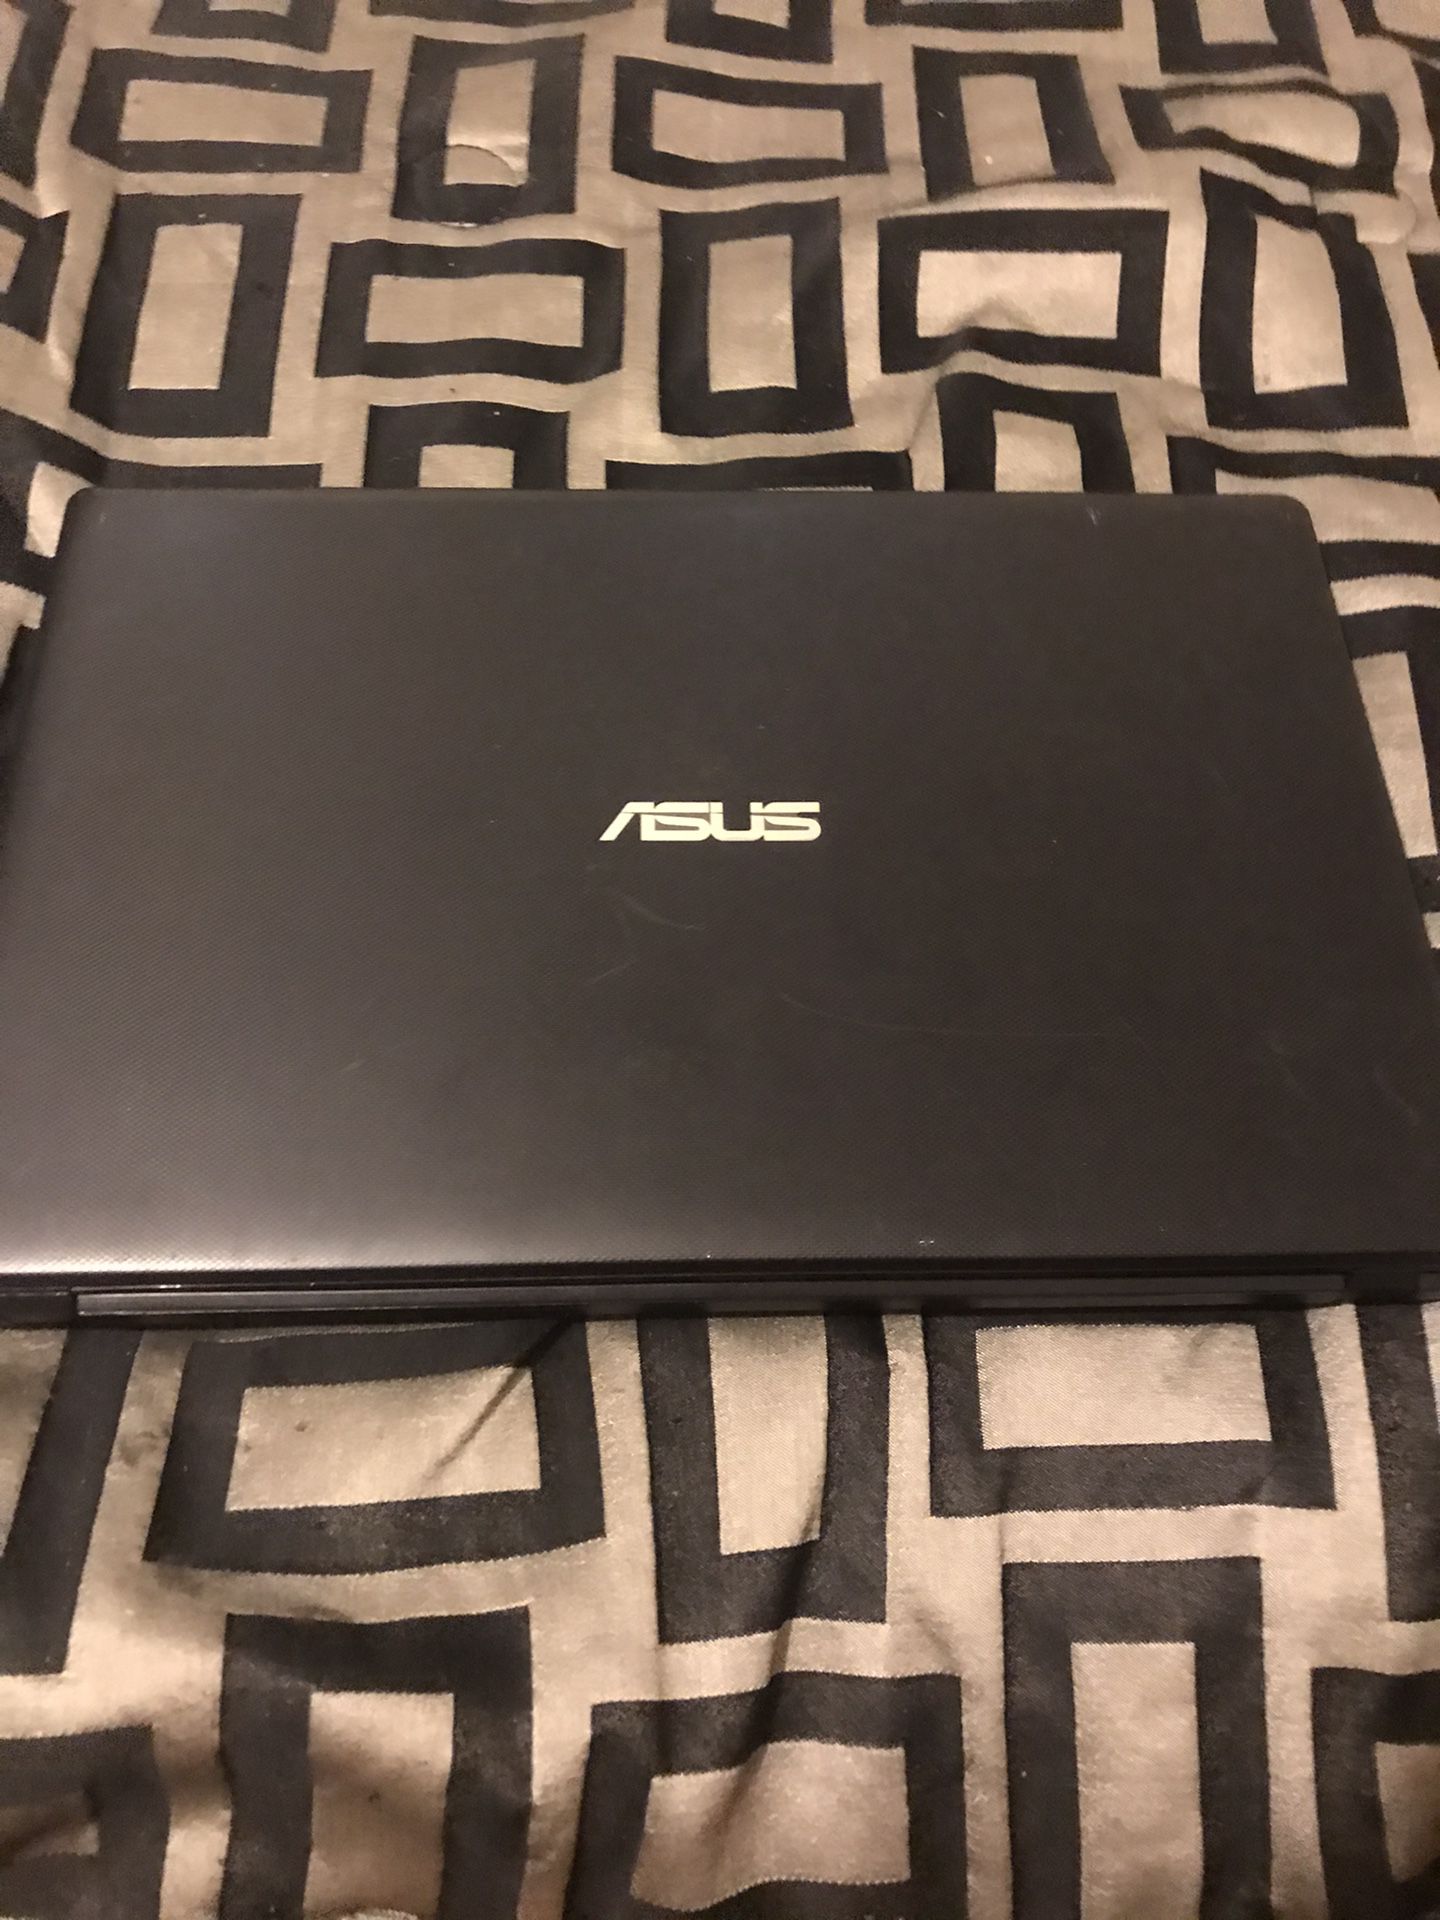 Asus gaming Laptop PC x64-basePC Asus notebook windows 10 64 but 500 gigabyte ssd (PICK UP ONLY)